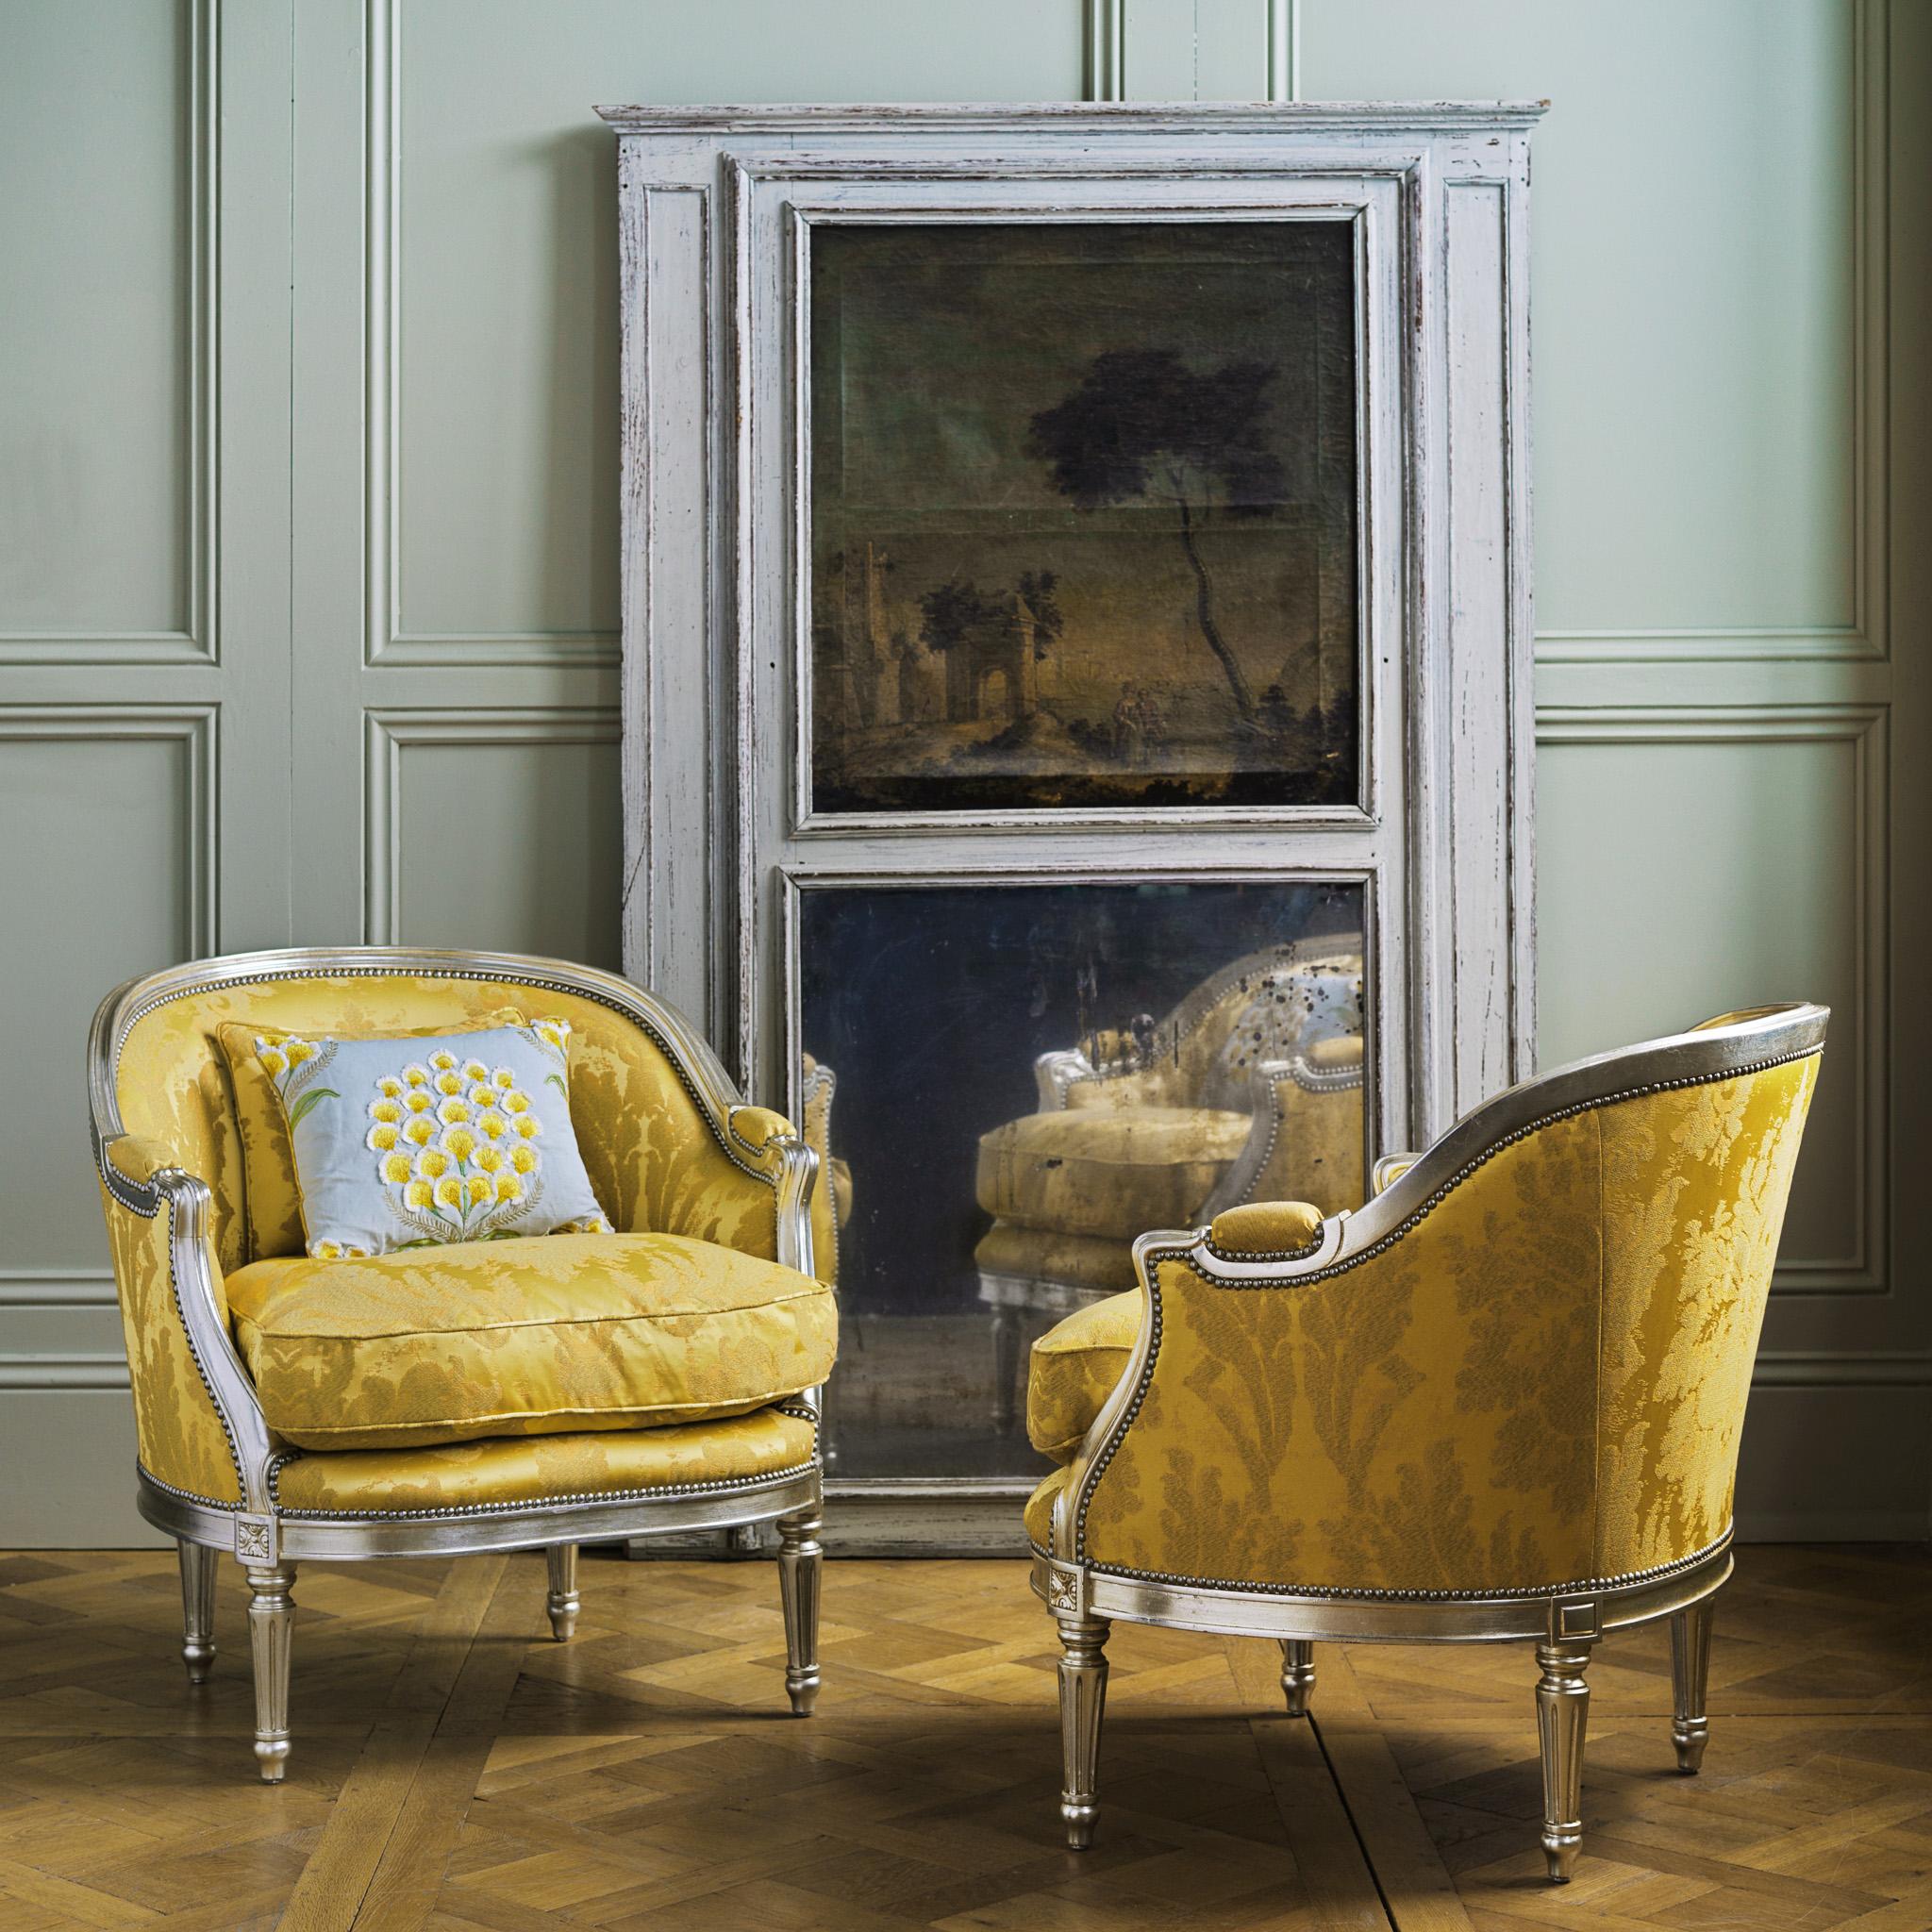 A pair of Hollywood Regency style marquise armchairs featuring elegant curves and a glamorous silver gilt wood finish. The chairs have a plump feather seat cushion for comfort and are upholstered in an Italian fabric by Rubelli with a blue scatter